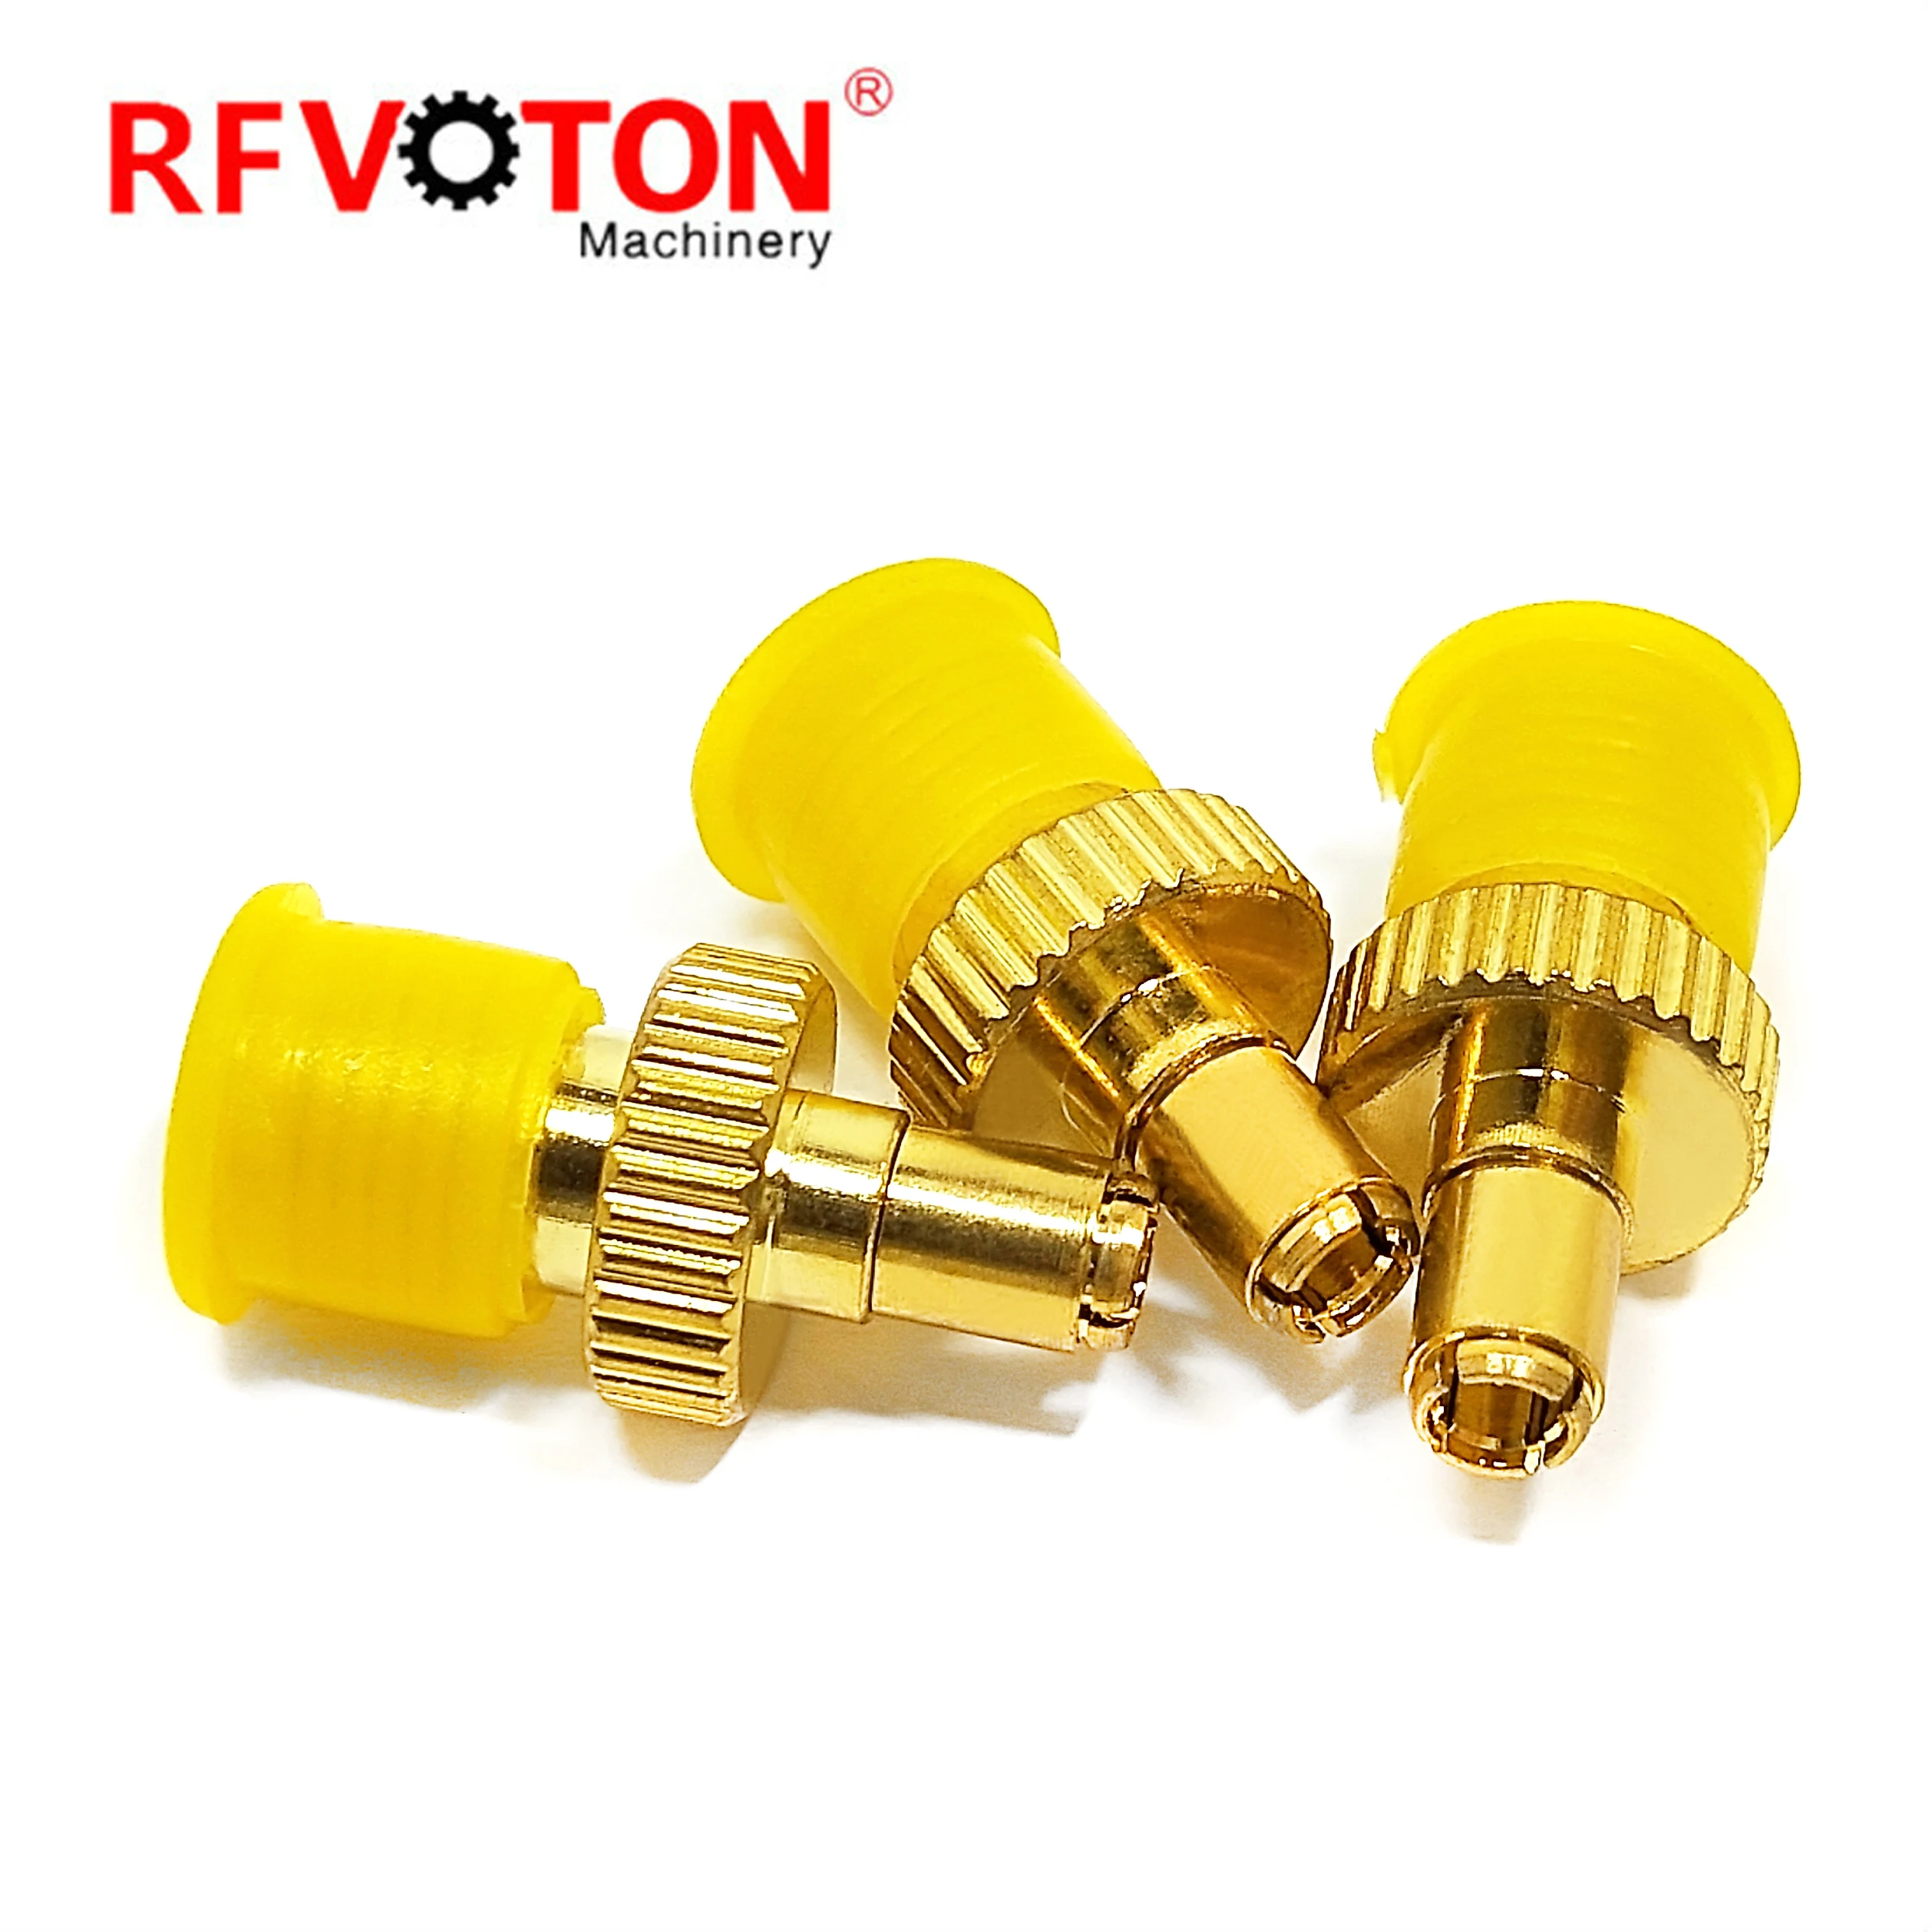 Factory directly Wholesale RF Adaptor SMA Female Jack To TS9 Male Plug RF Coax Coaxial Adapter RF Converter details